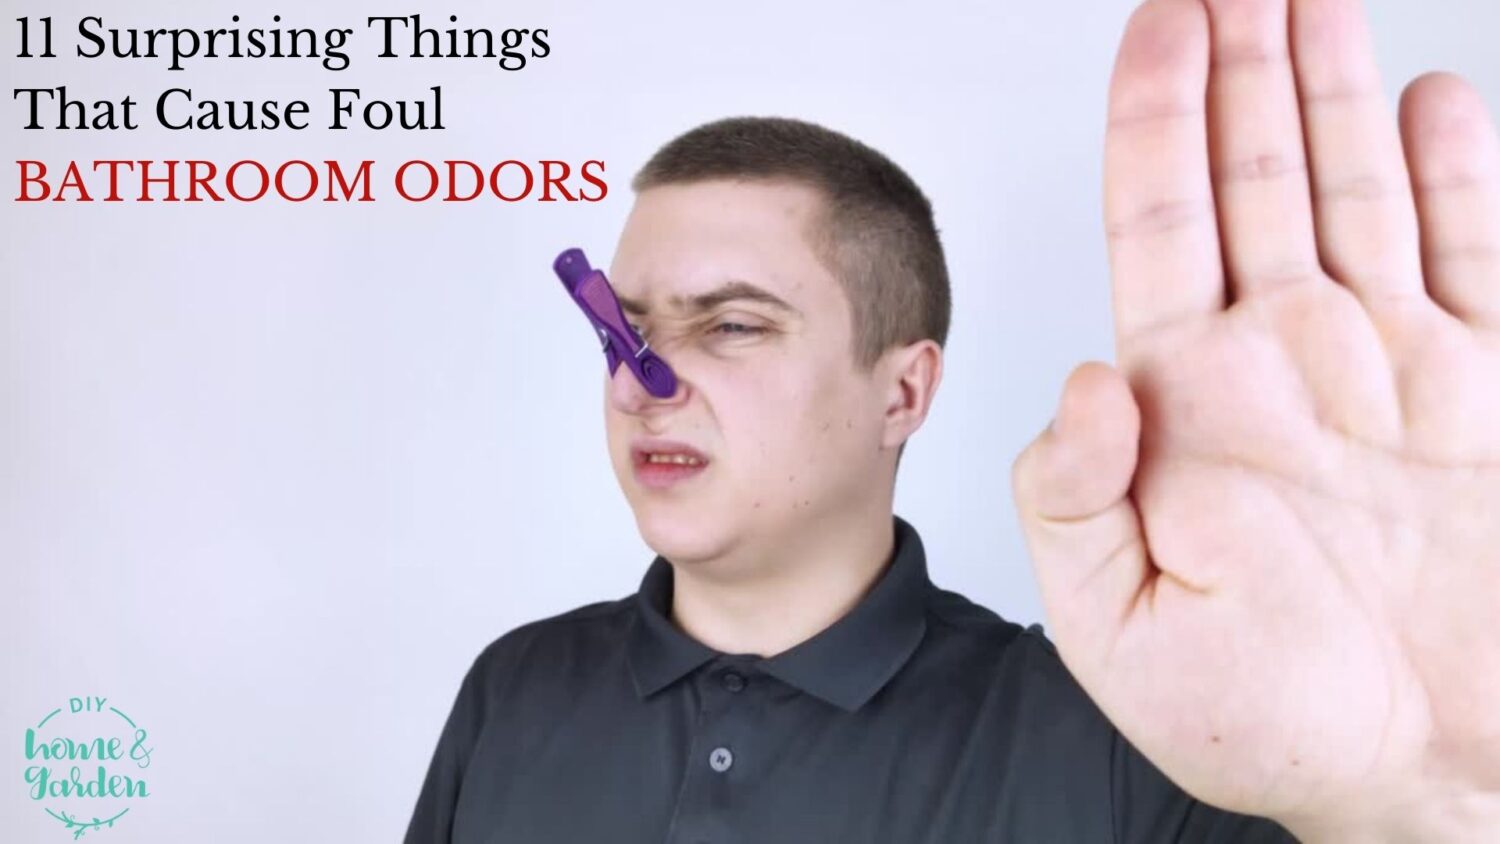 11 Surprising Things That Cause Bad Bathroom Odors